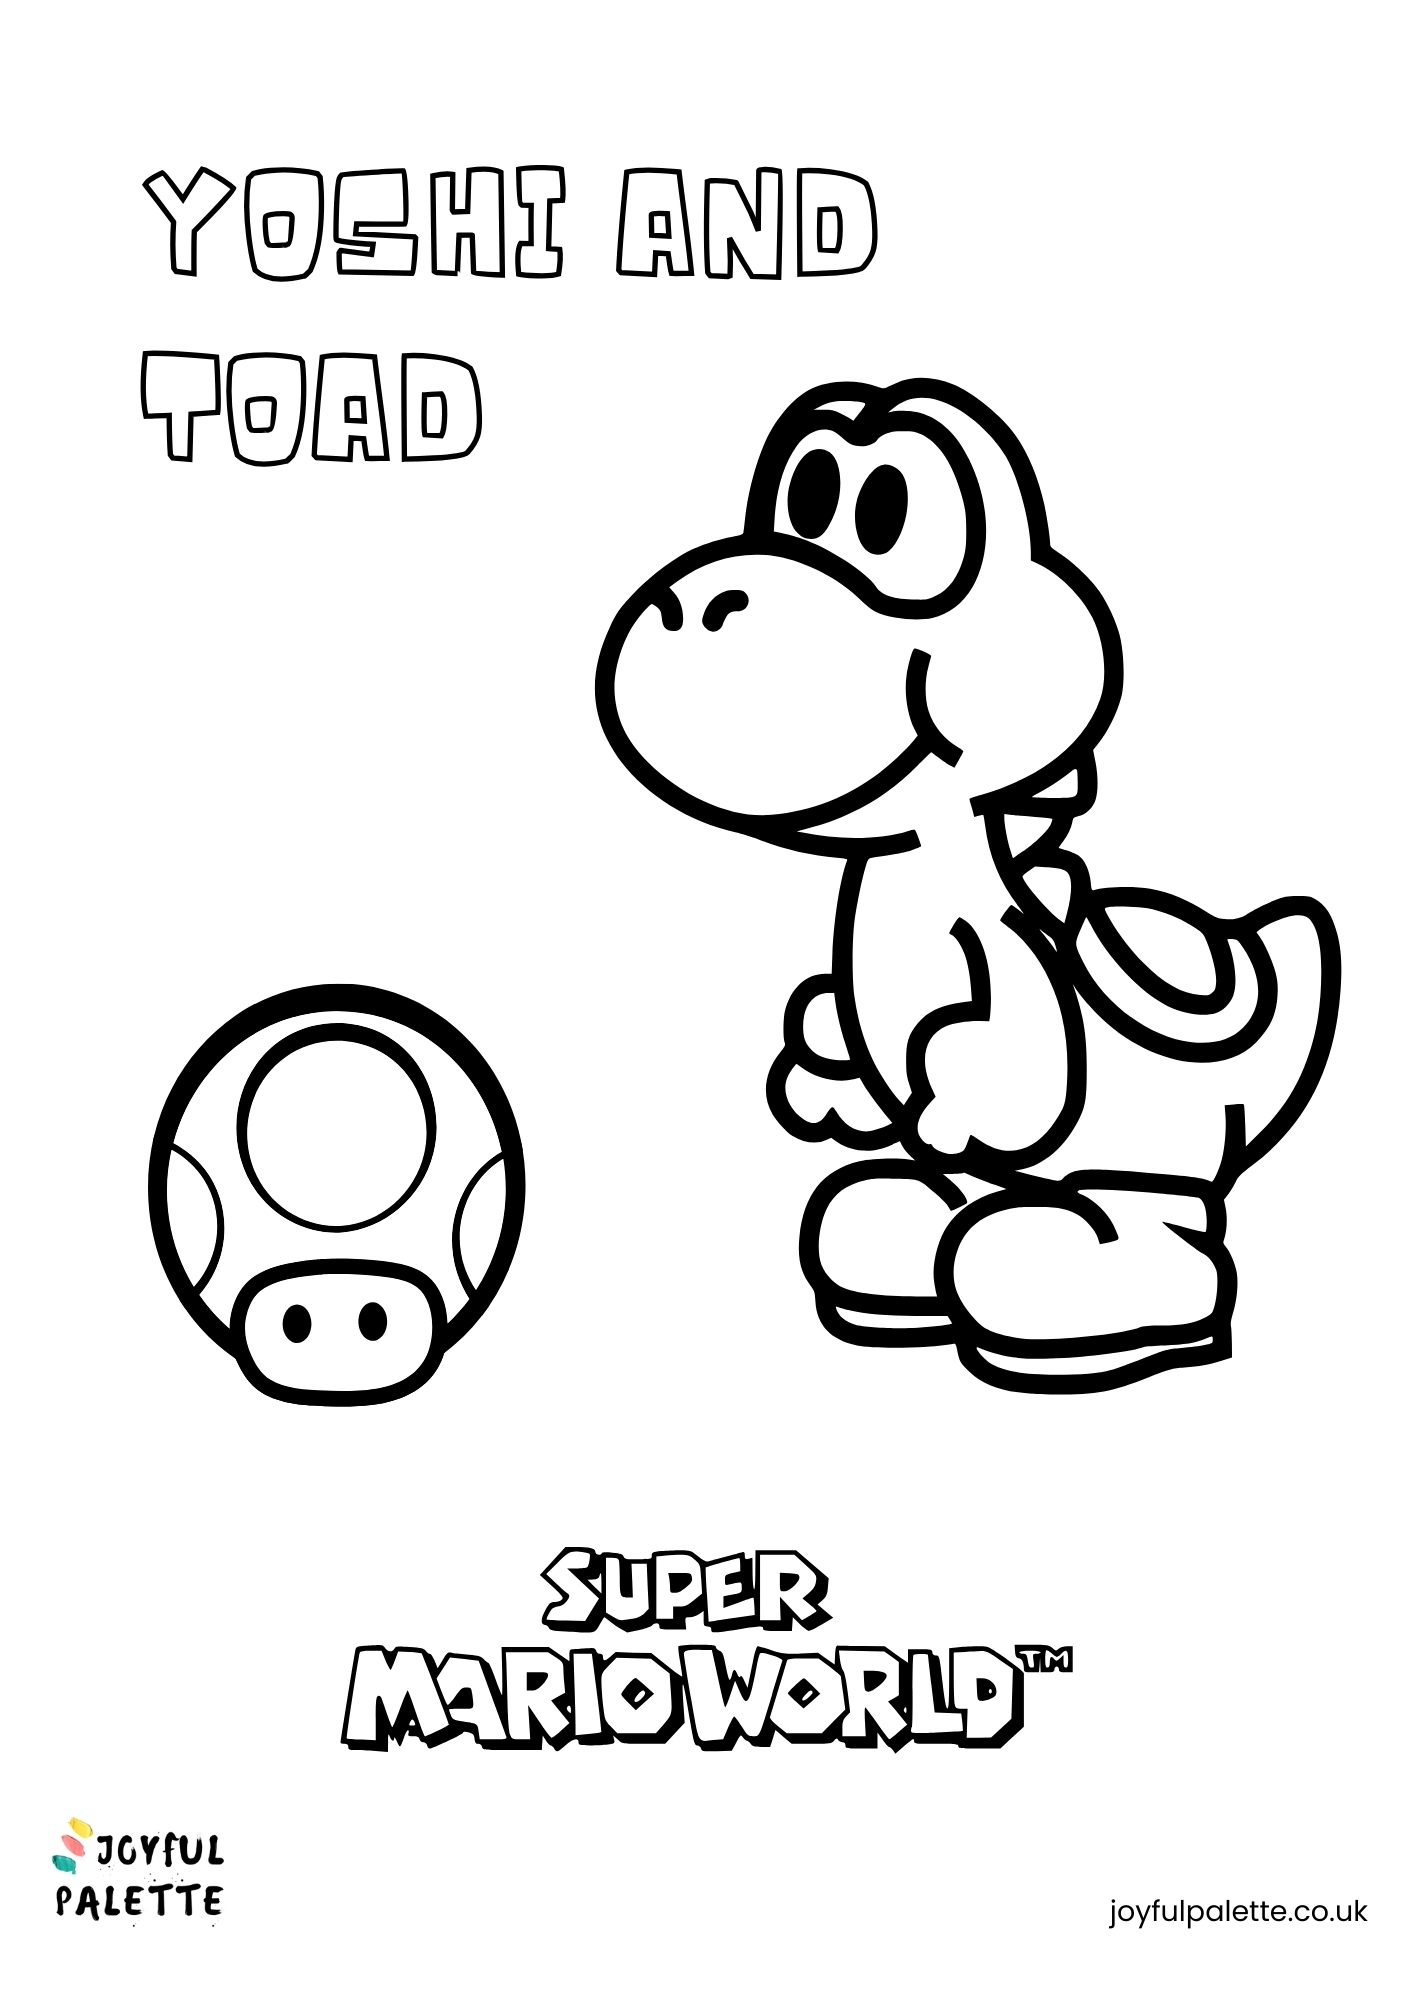 yoshi and toad coloring page